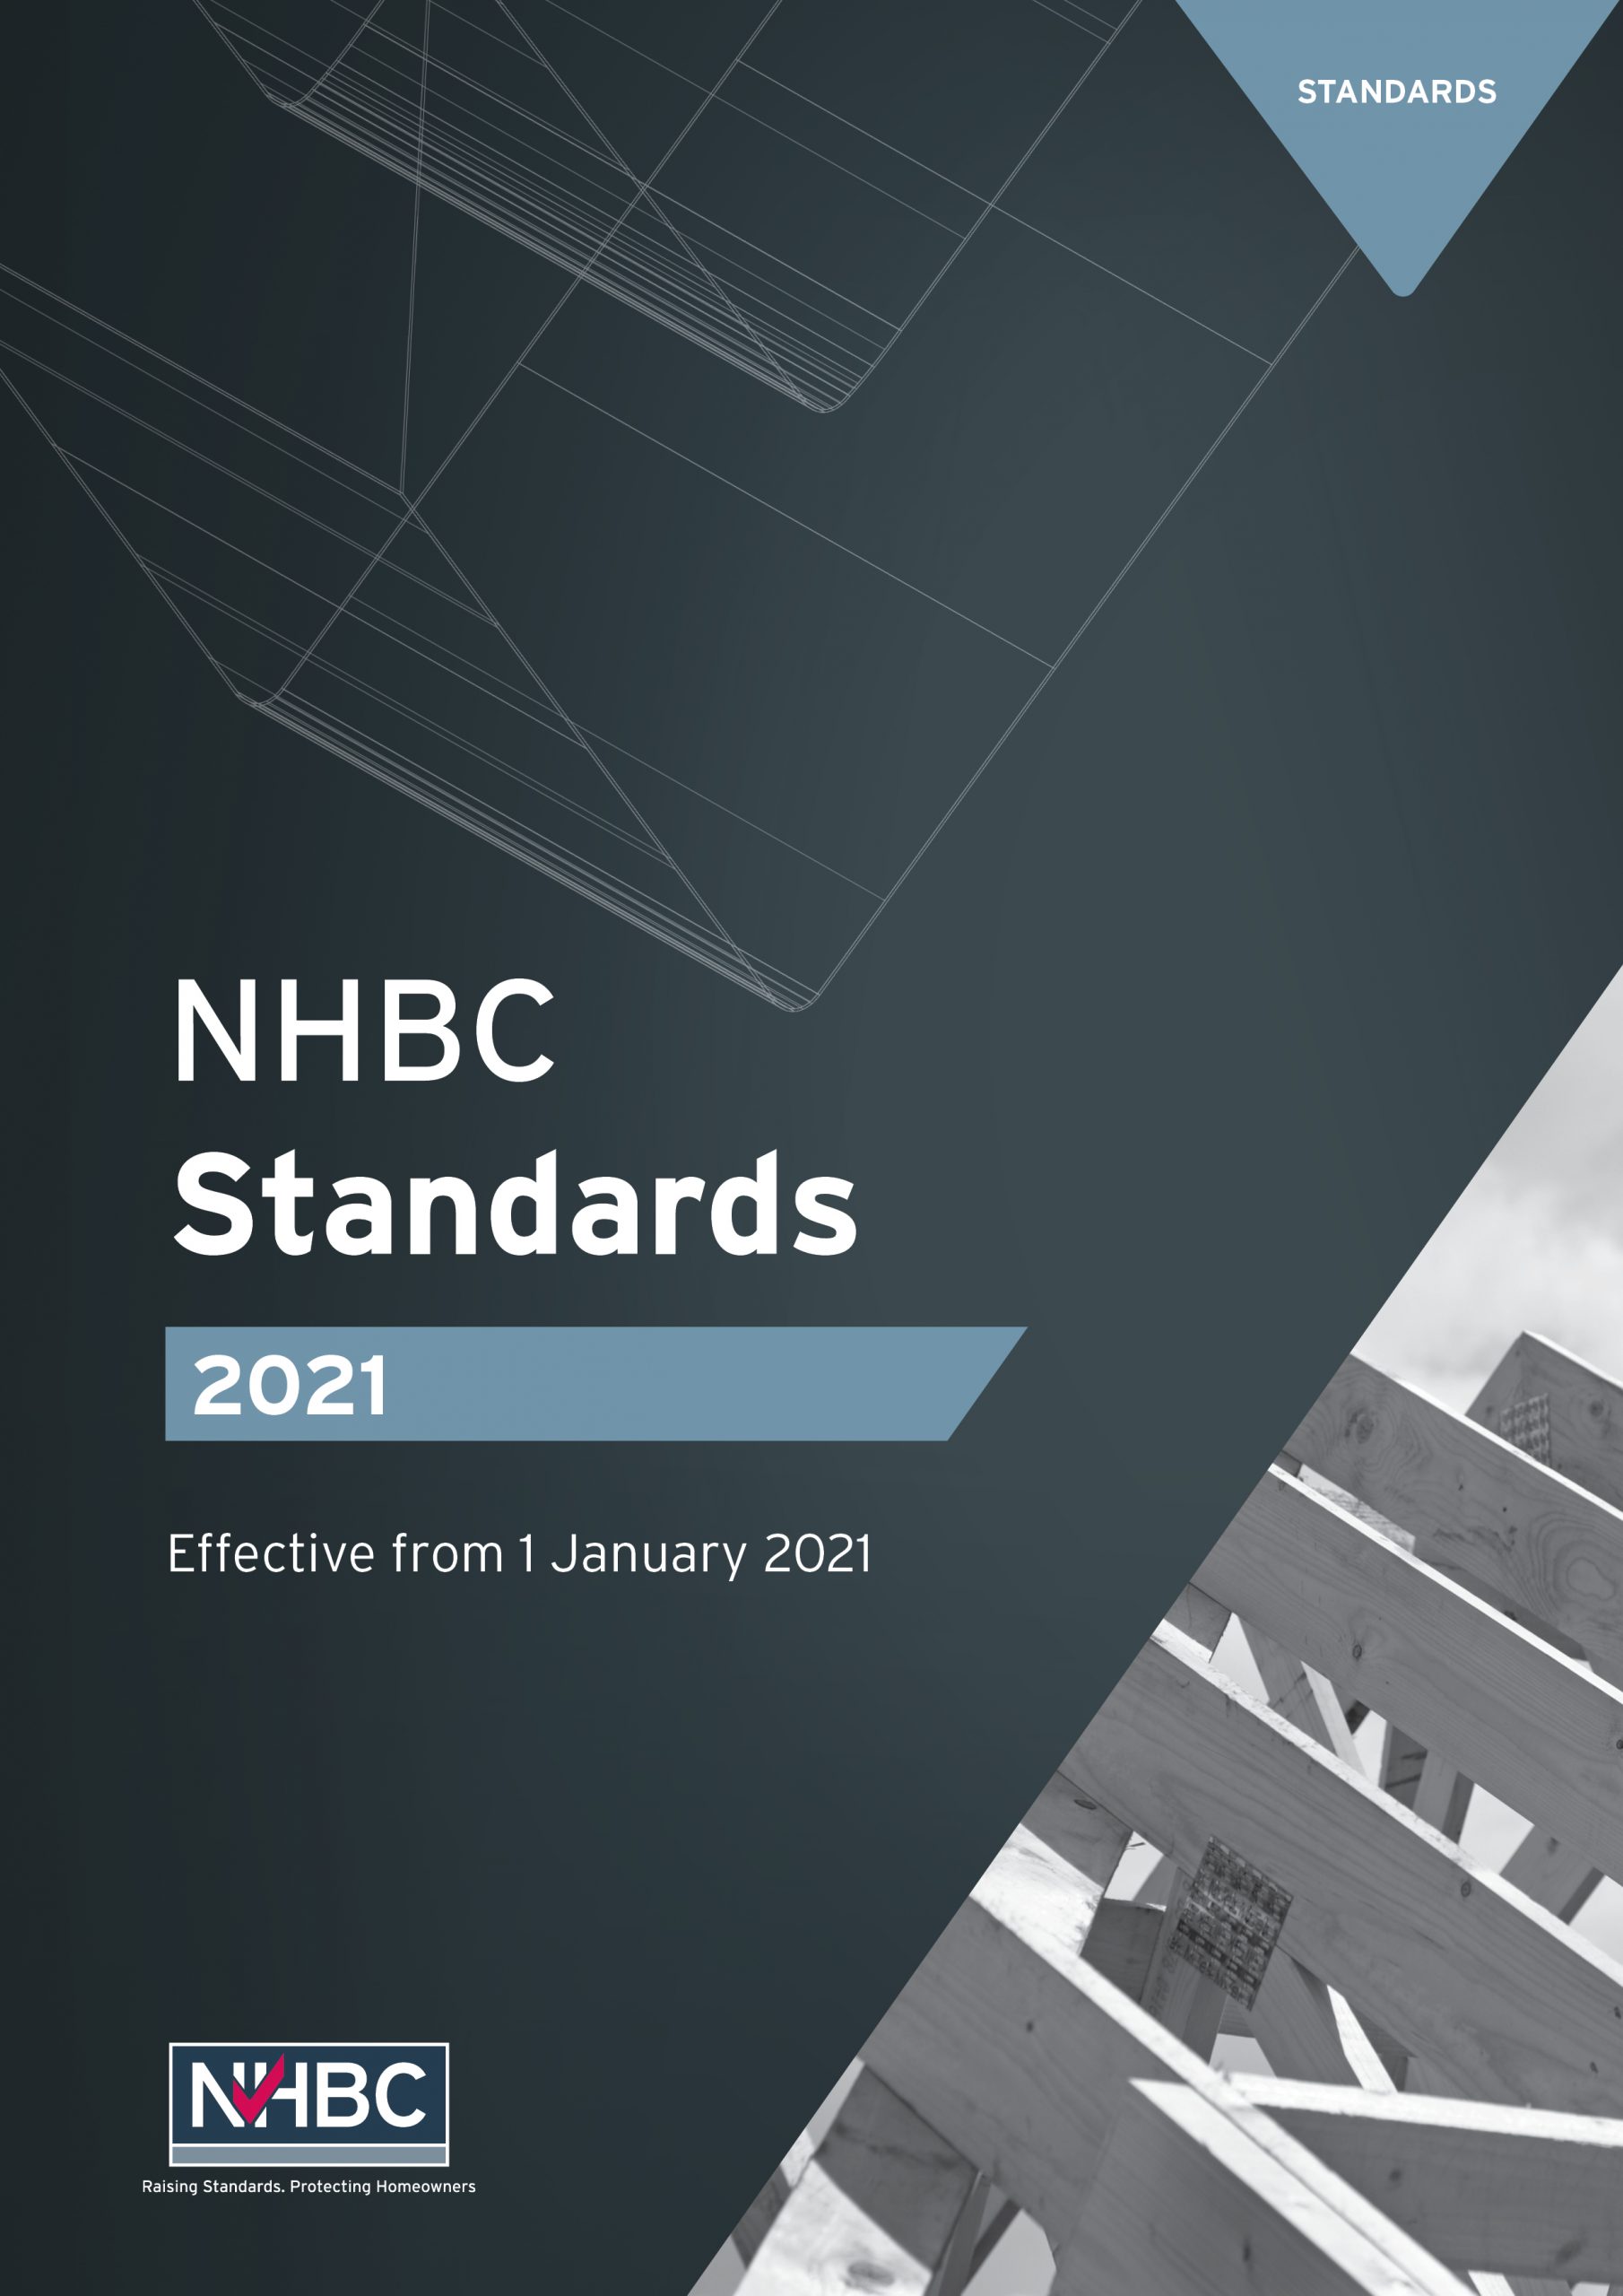 NHBC launches new 2021 Standards for UK housebuilders @NHBC